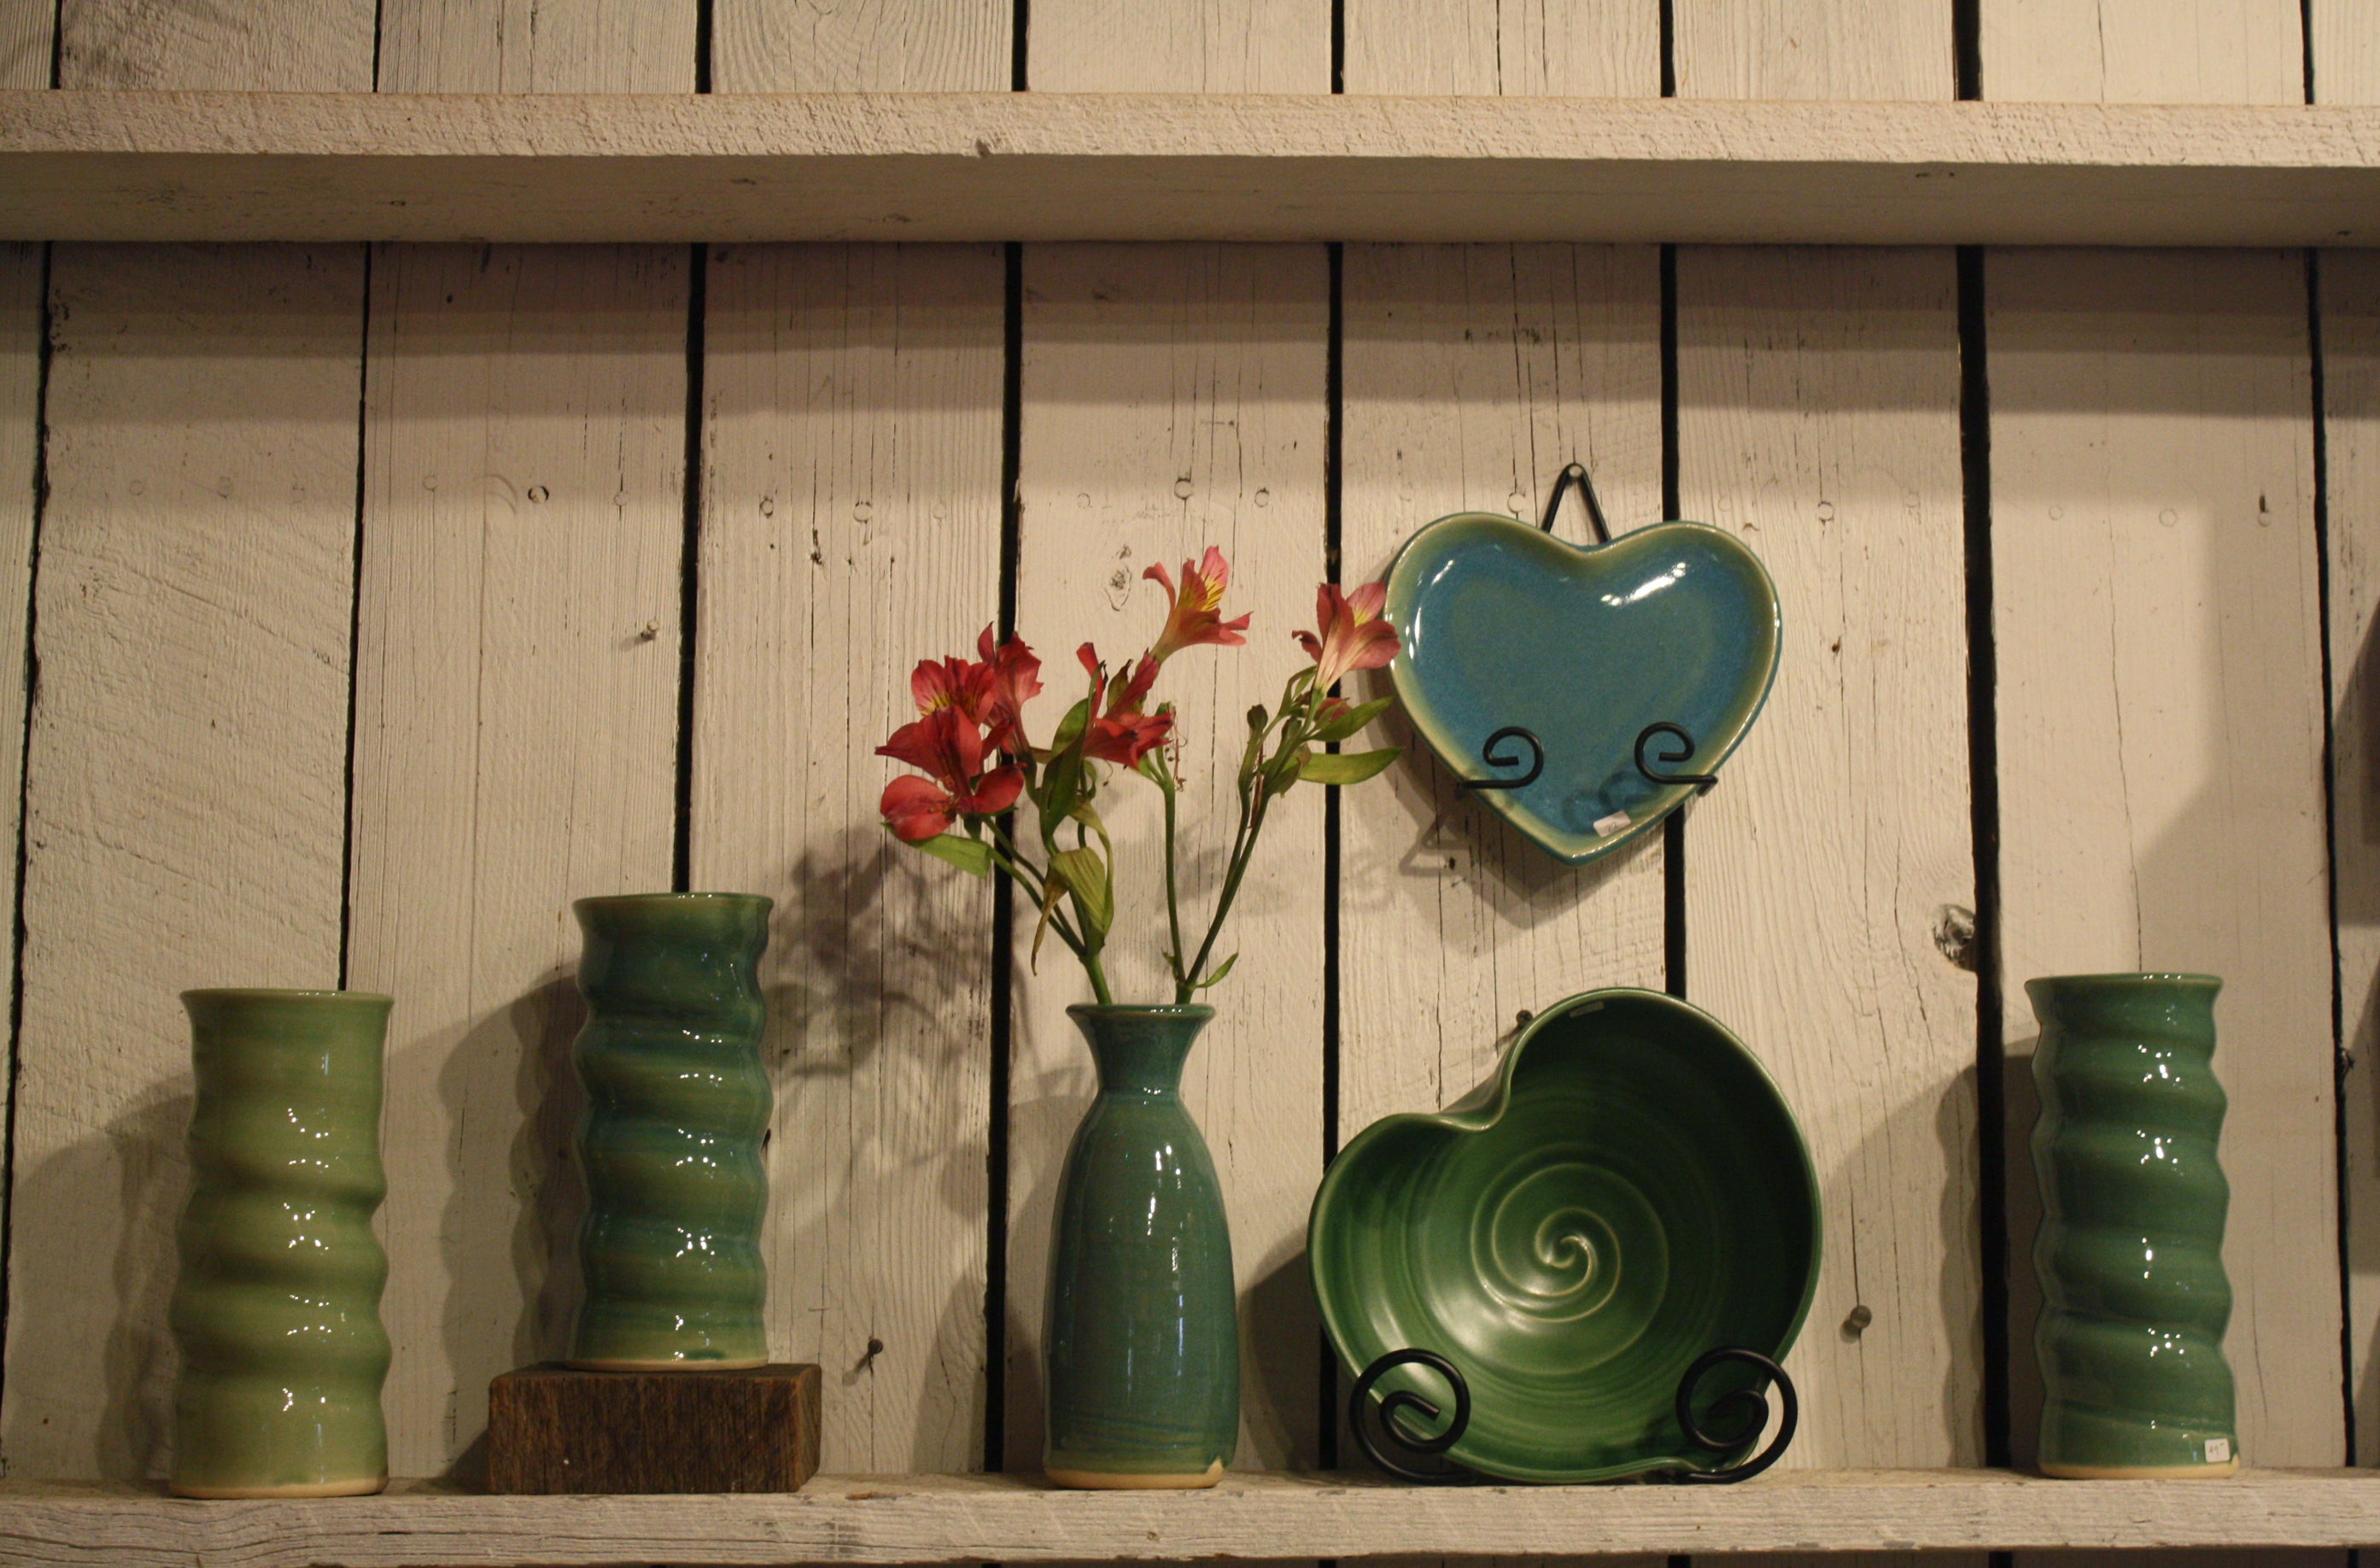 A display of pottery at Greenbridge Pottery Studio